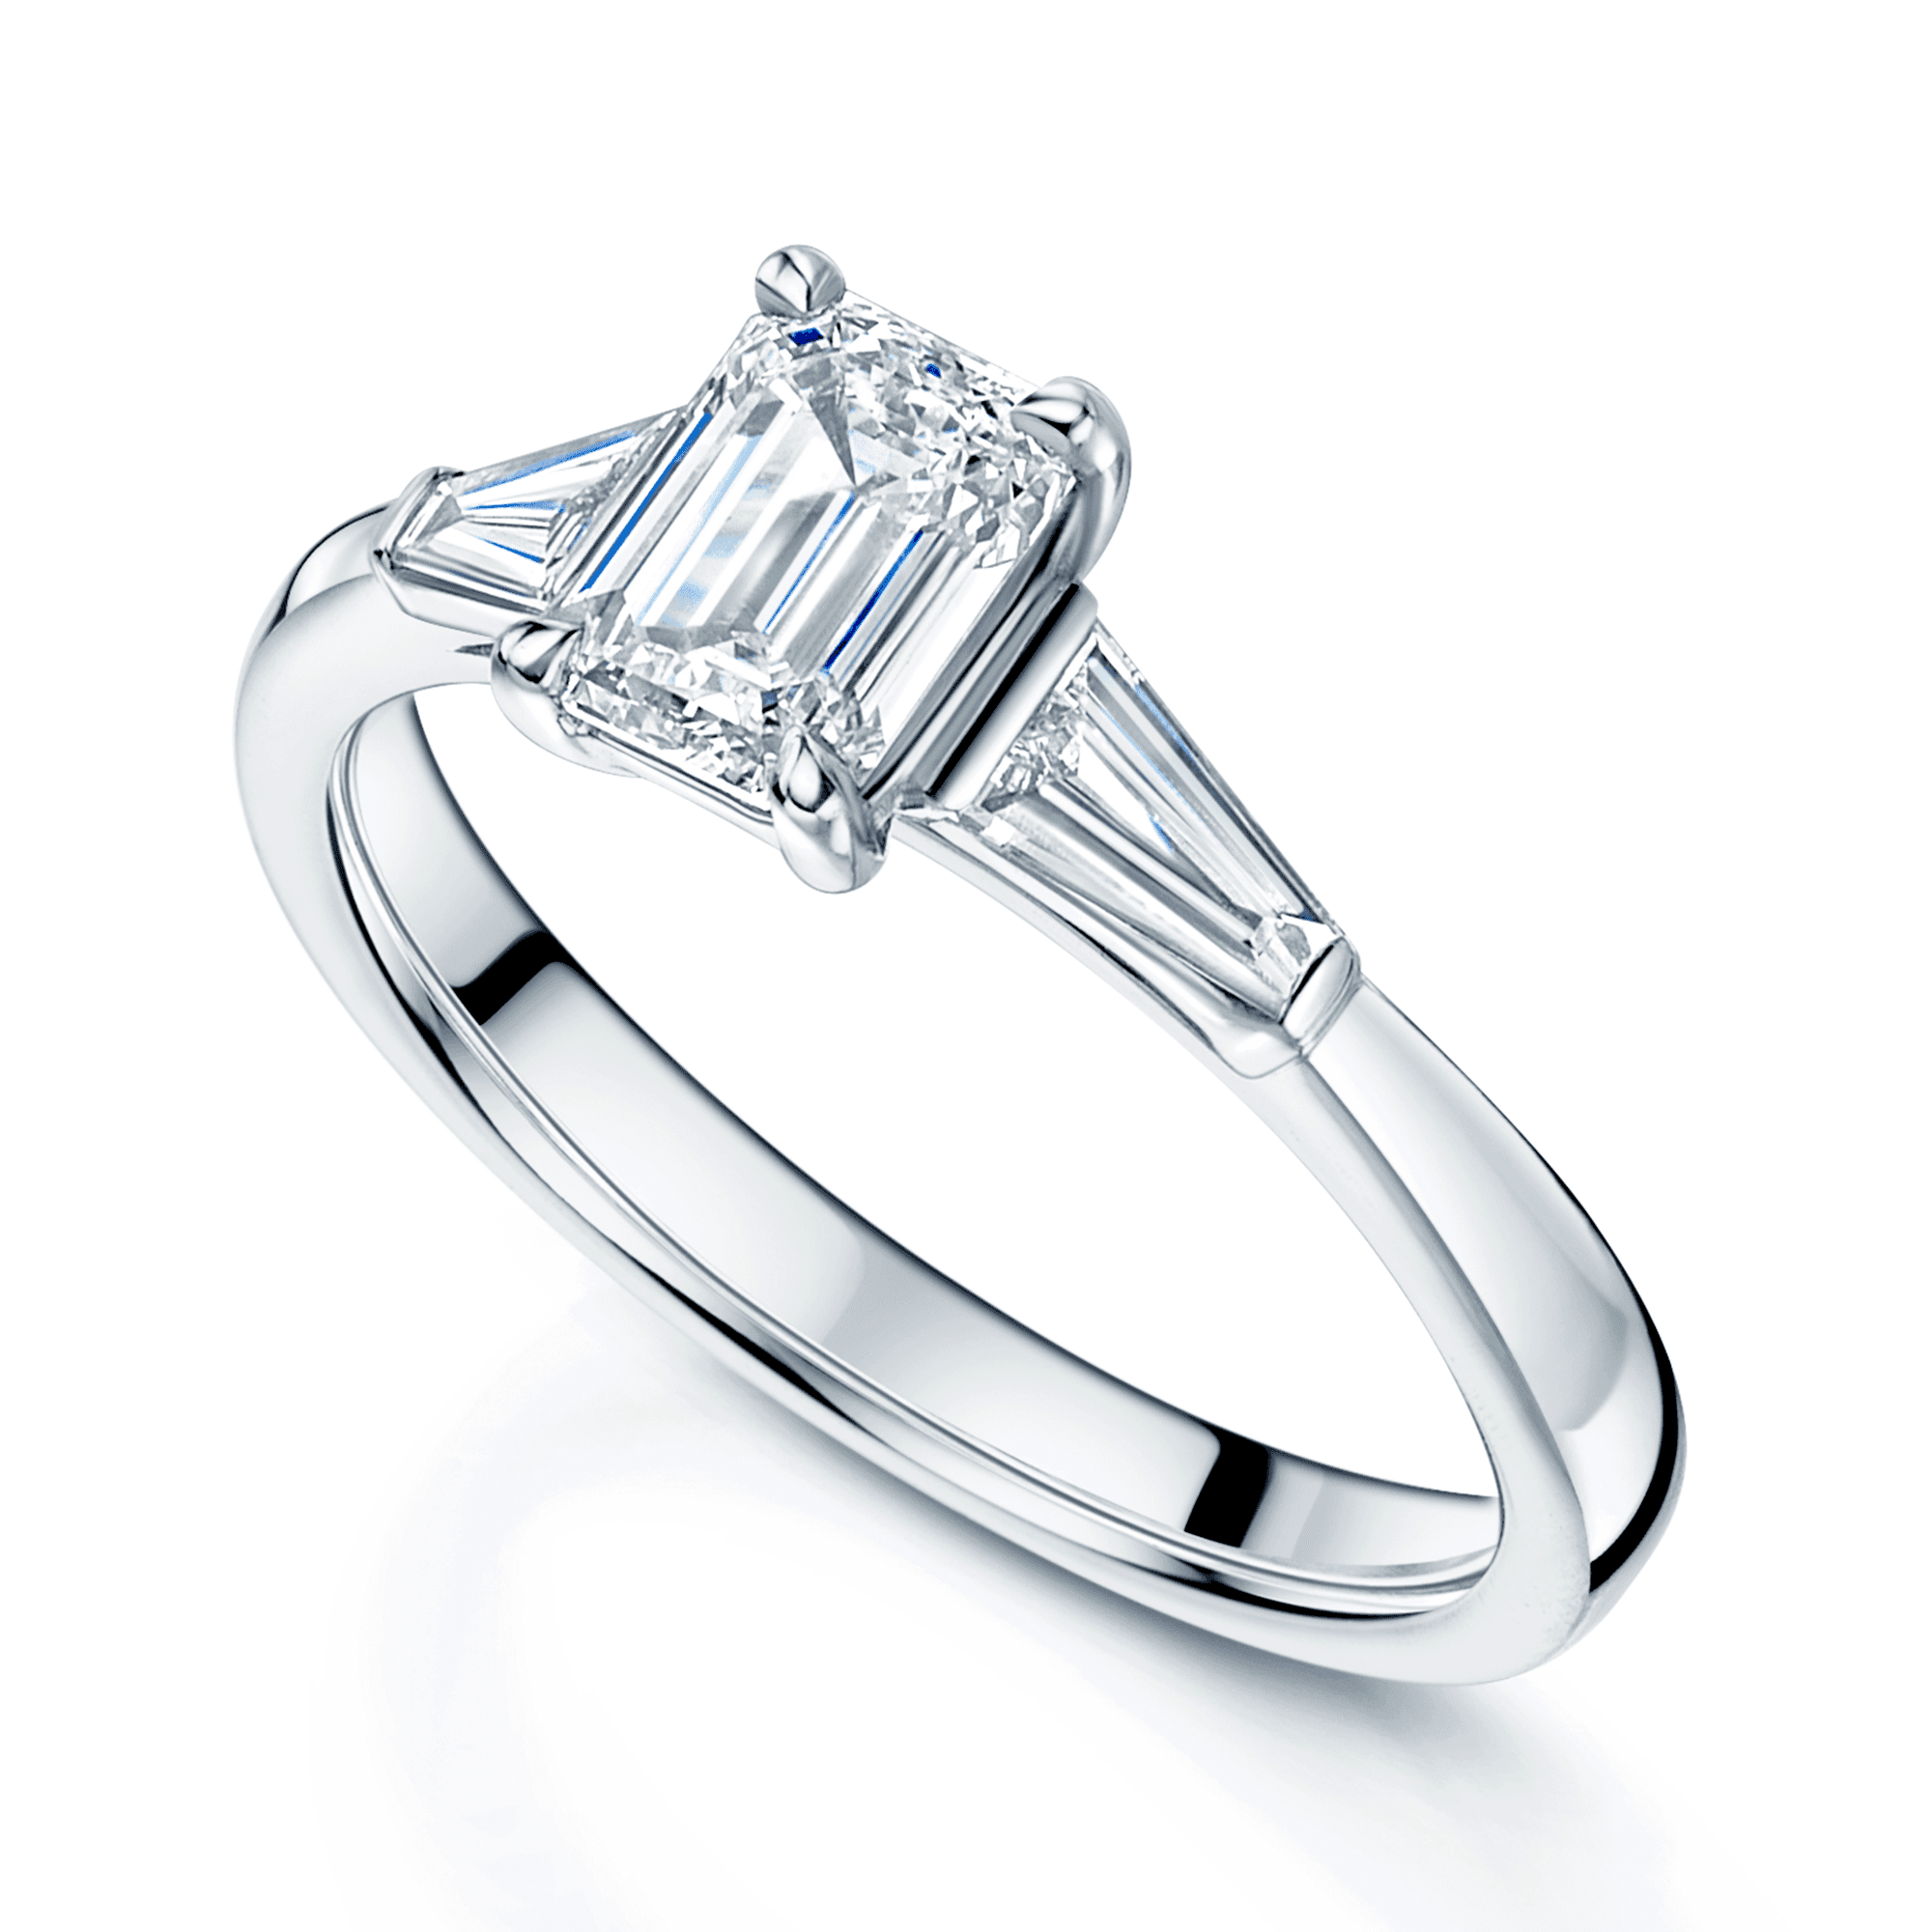 Platinum GIA Certificated Emerald Cut Diamond And Tapered Baguette Cut Three Stone Engagement Ring